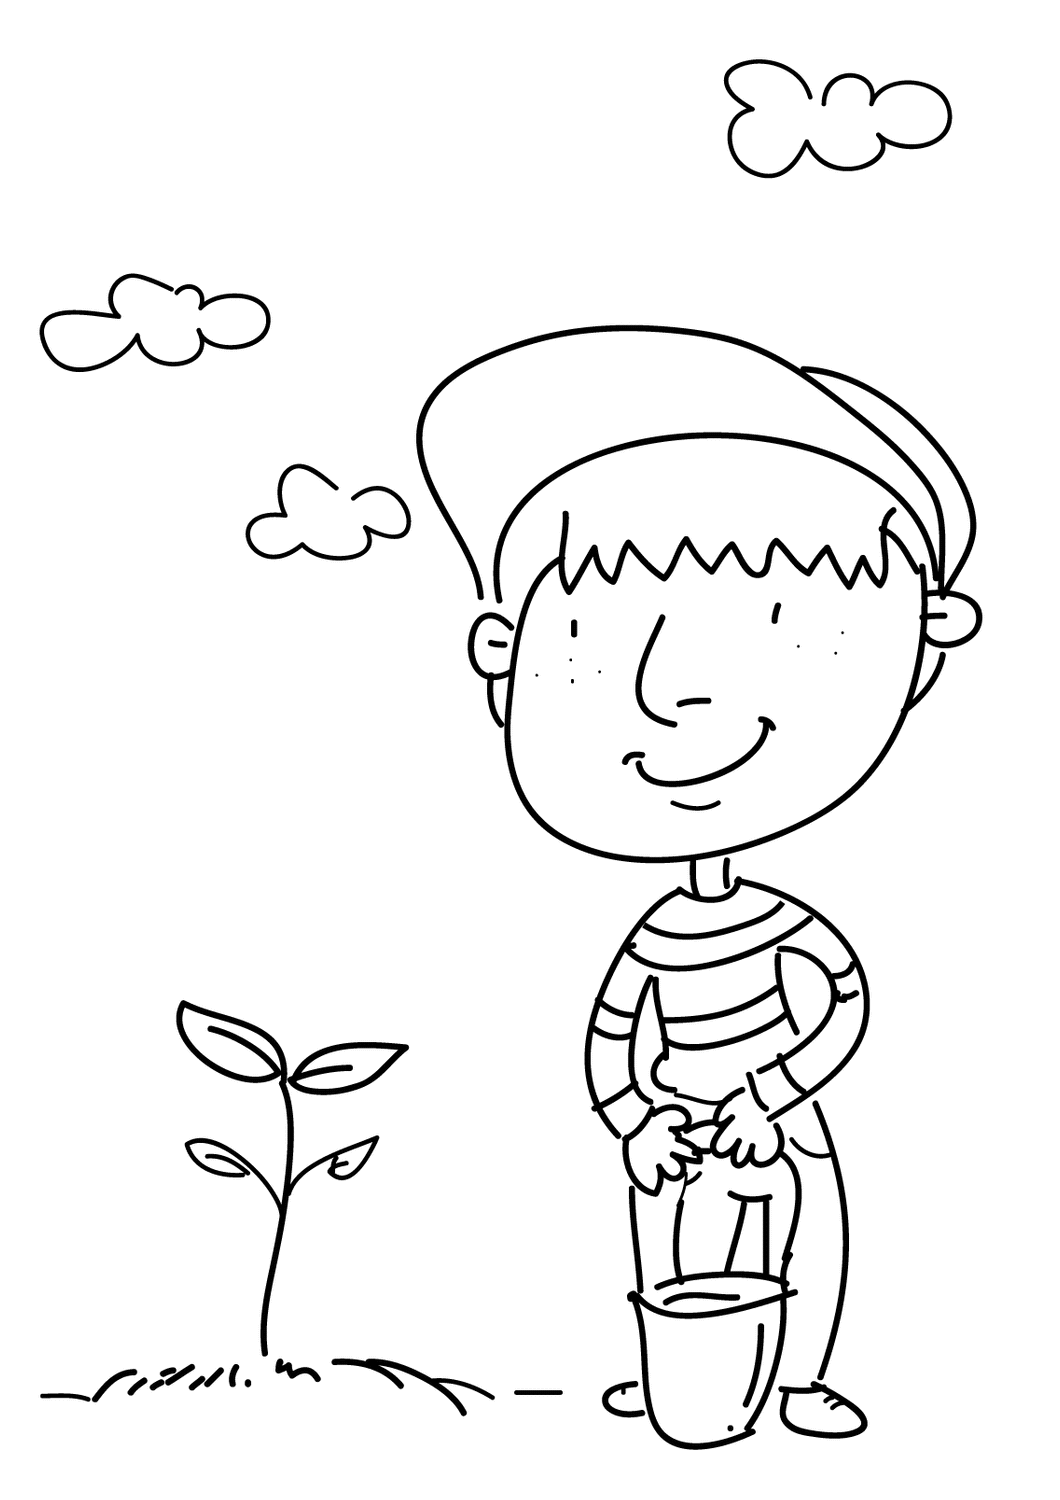 Plant a Tree on Earth Day Coloring Page